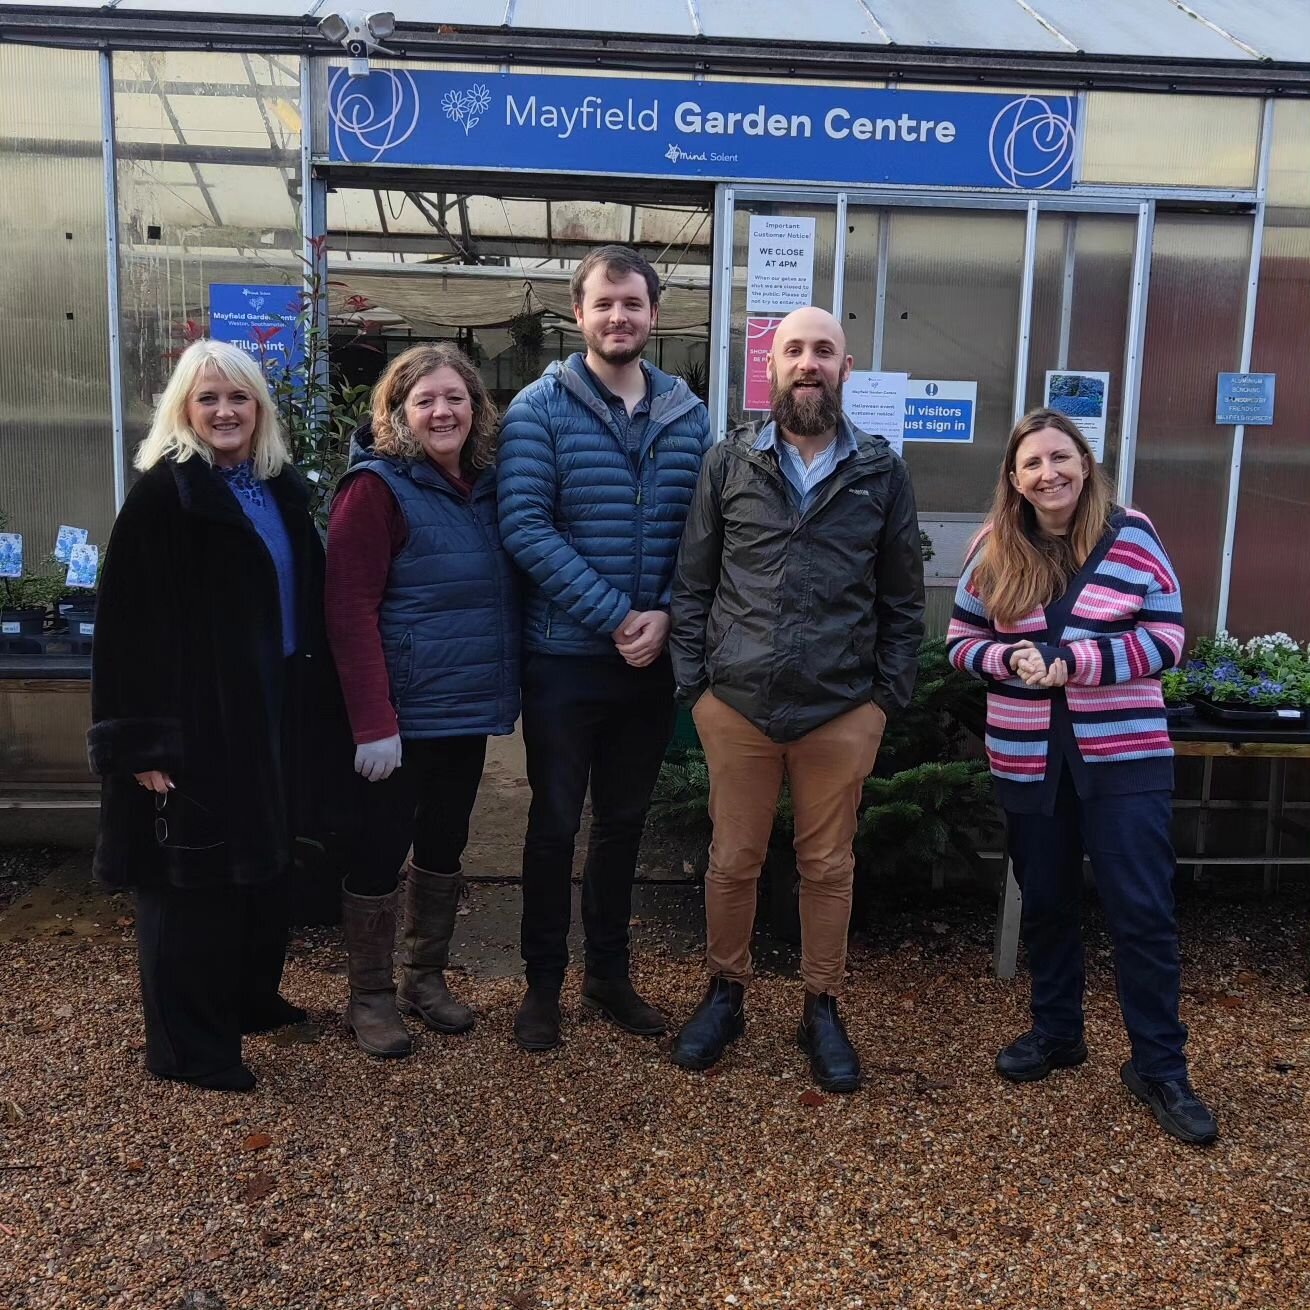 Great to meet the team from @solentmind and @mayfieldgardencentre 😁🌱

What a great place Mayfield is! Not just a garden centre but a whole community of people coming together to grow, learn and connect for their wellbeing. I was really inspired aft